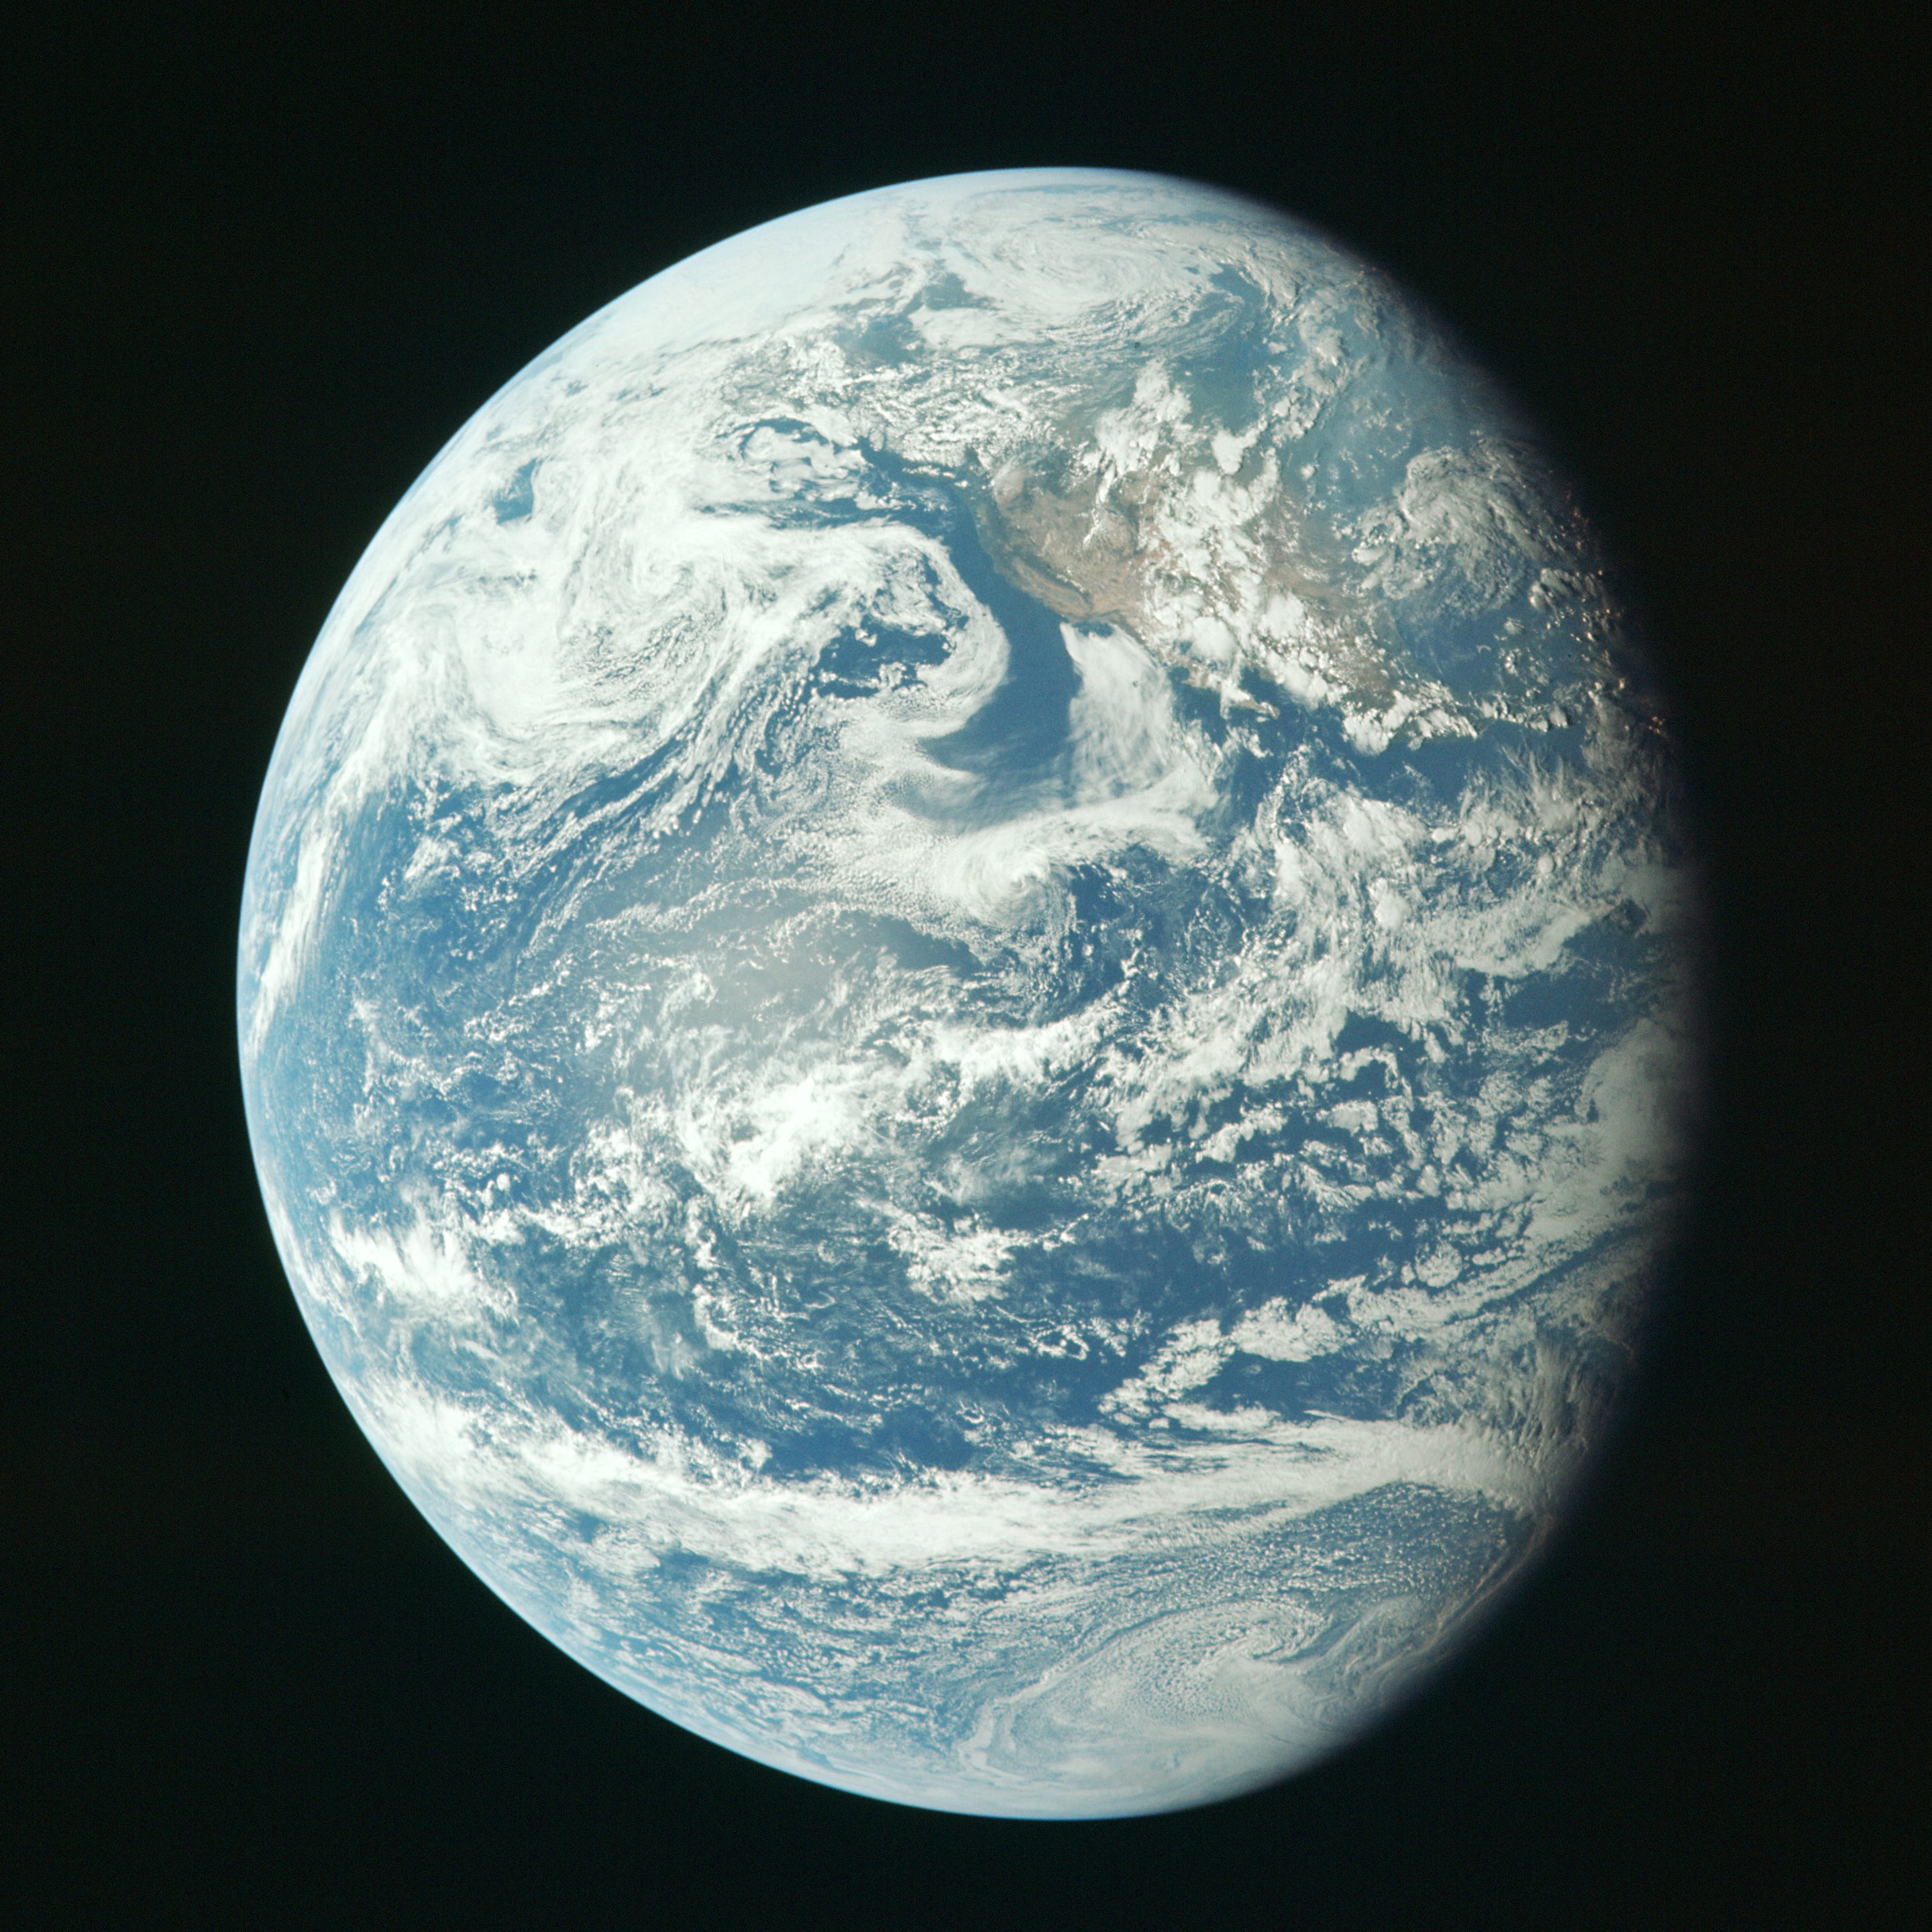 View of the Earth from Apollo 11. Credit NASA